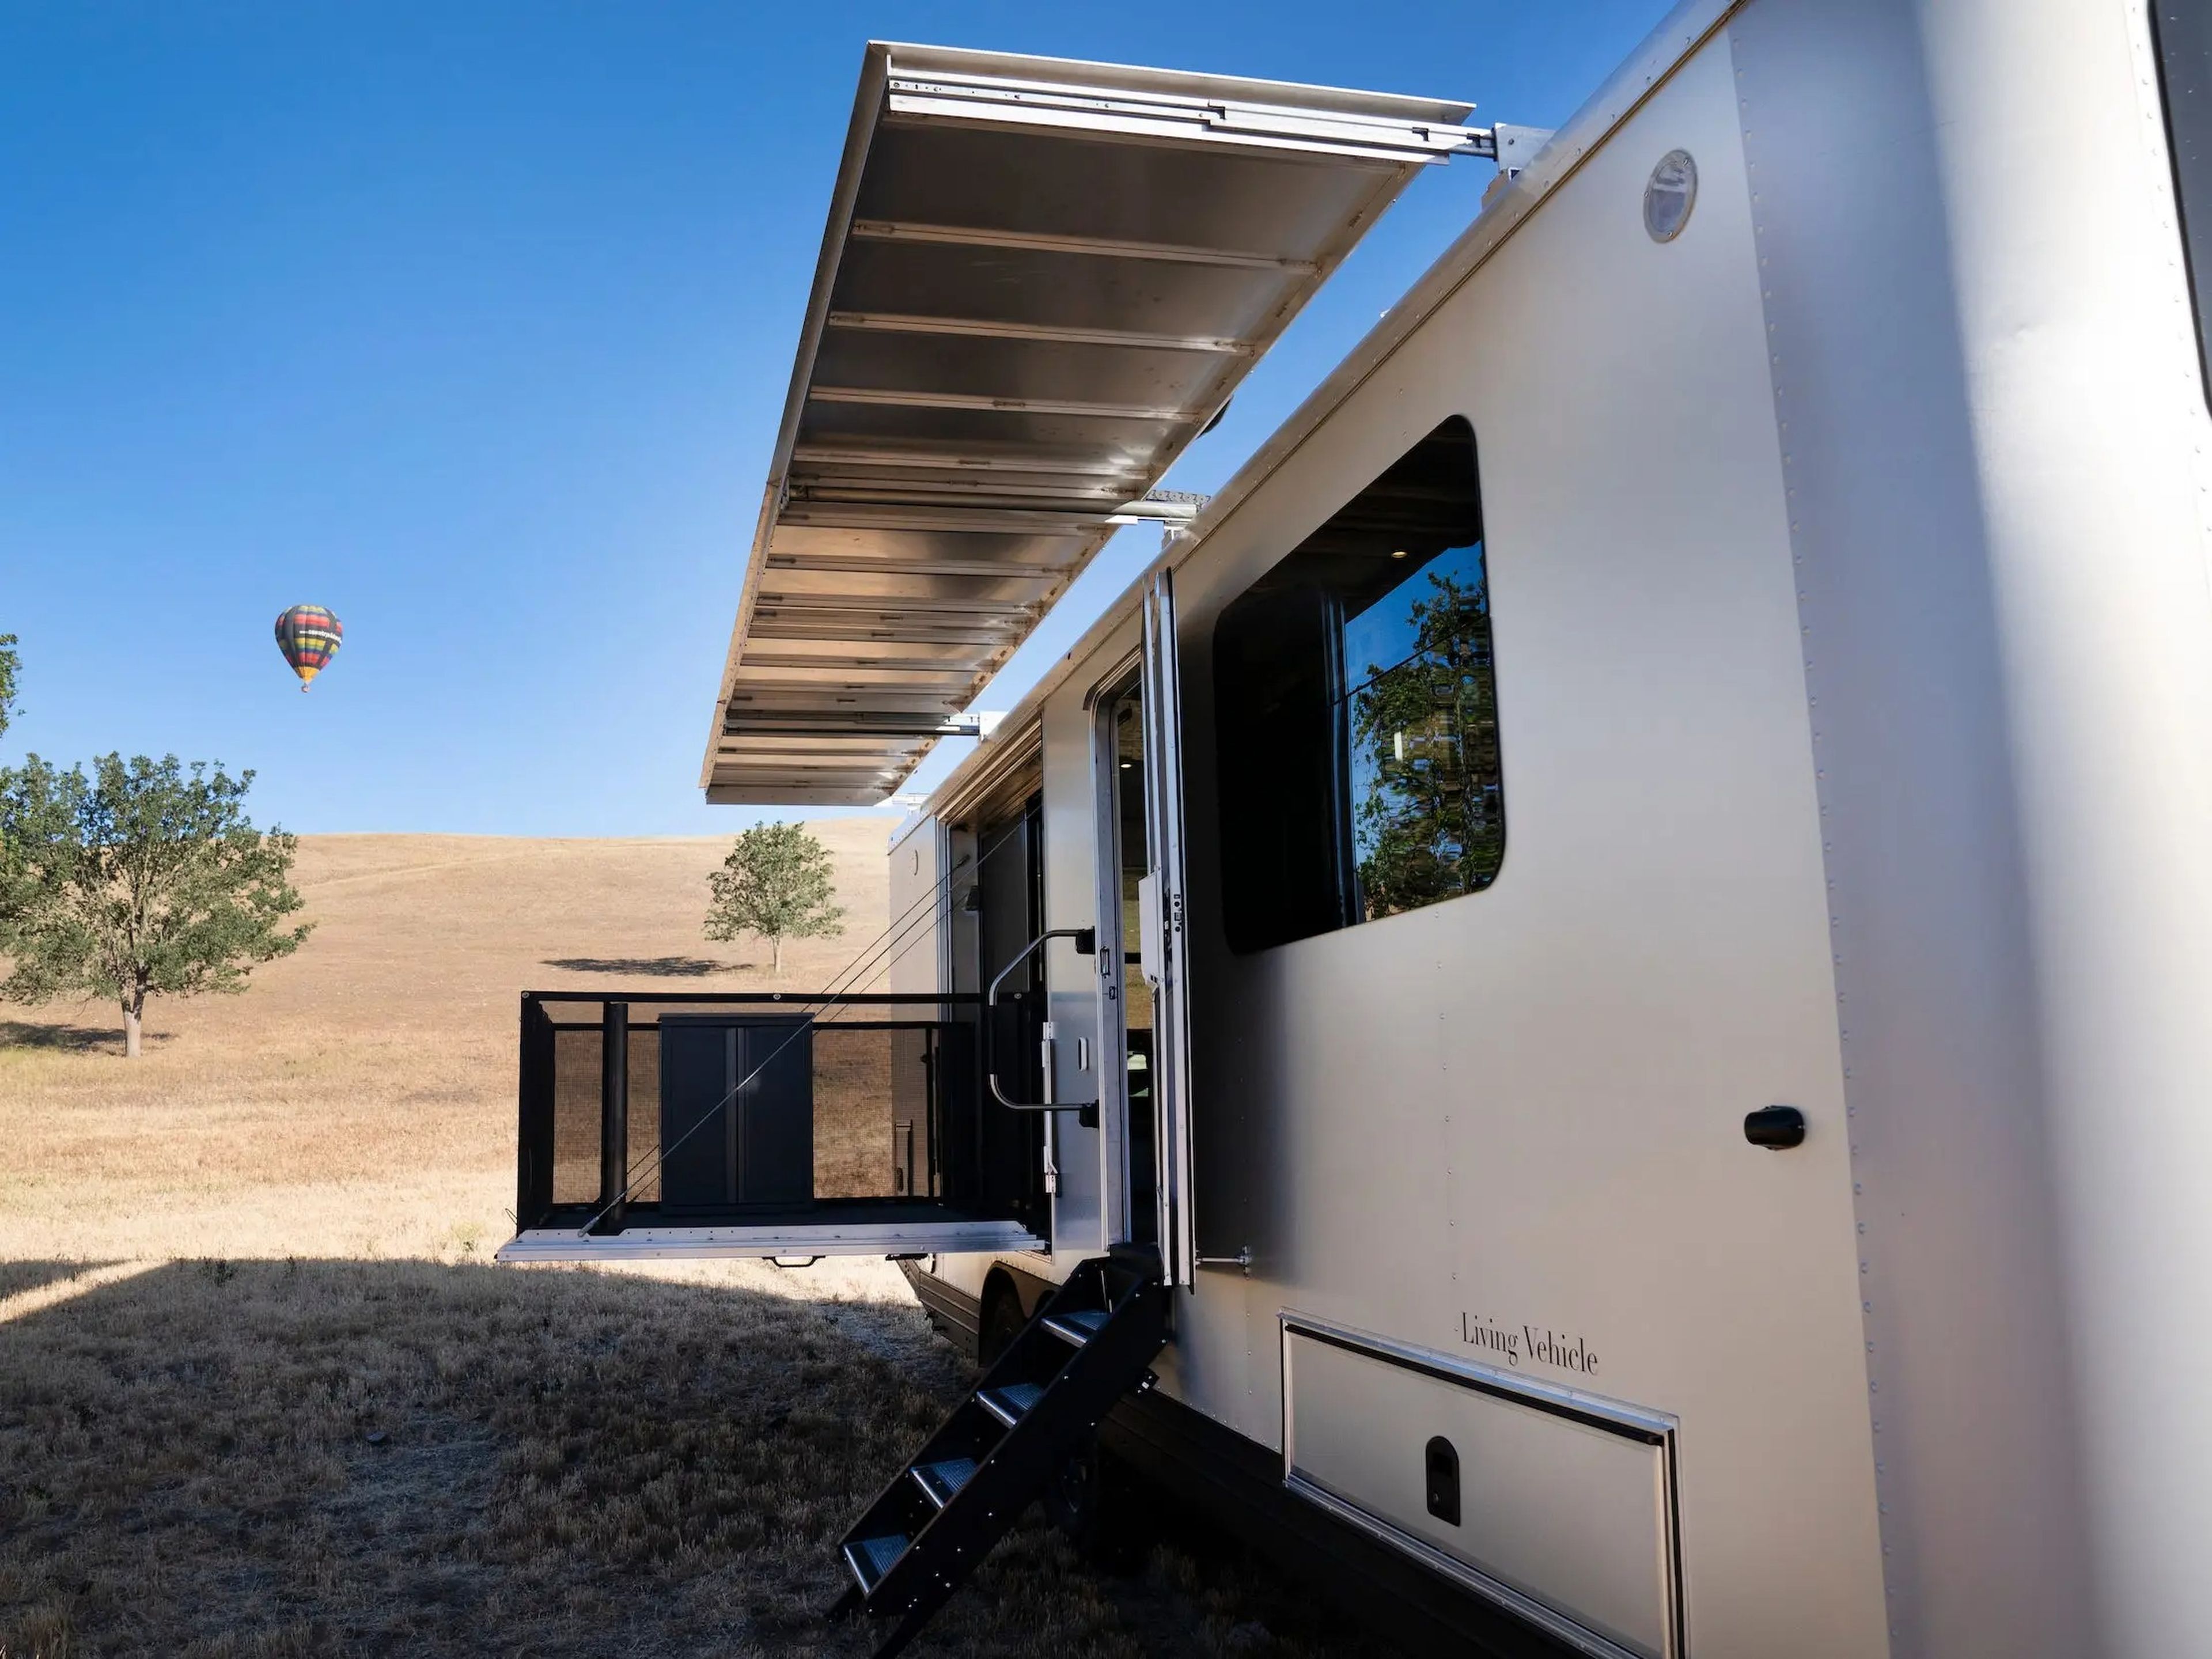 The exterior of the travel trailer as it sits on a brown field. The awning and patio are extended.